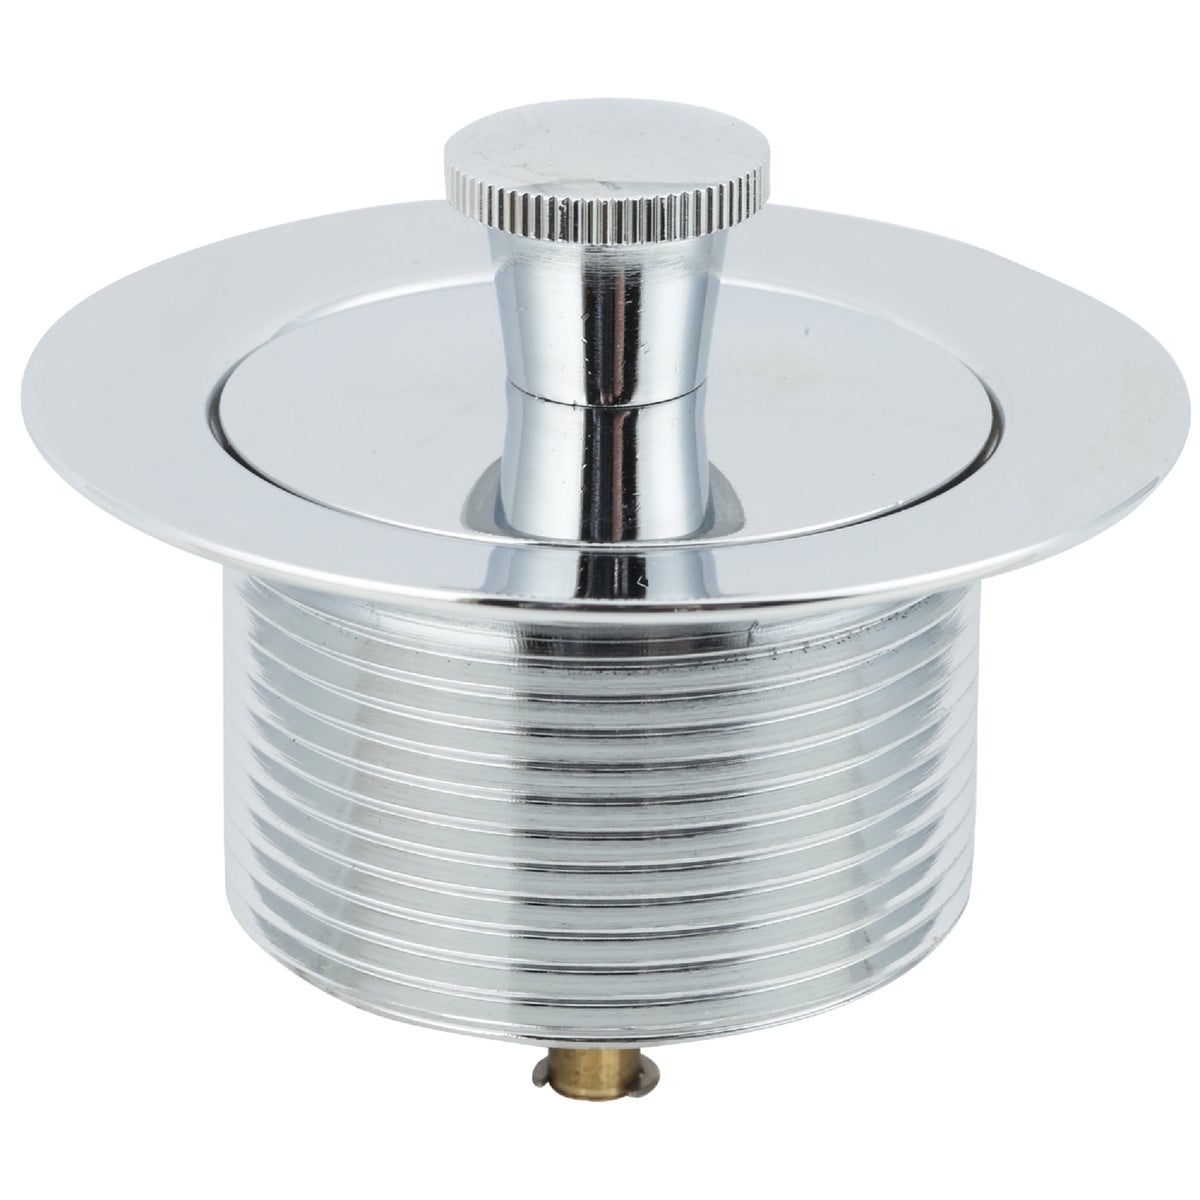 Do it 1-7/8 In. to 2-1/4 In. Lift and Lock Bathtub Drain Stopper with Chrome Finish